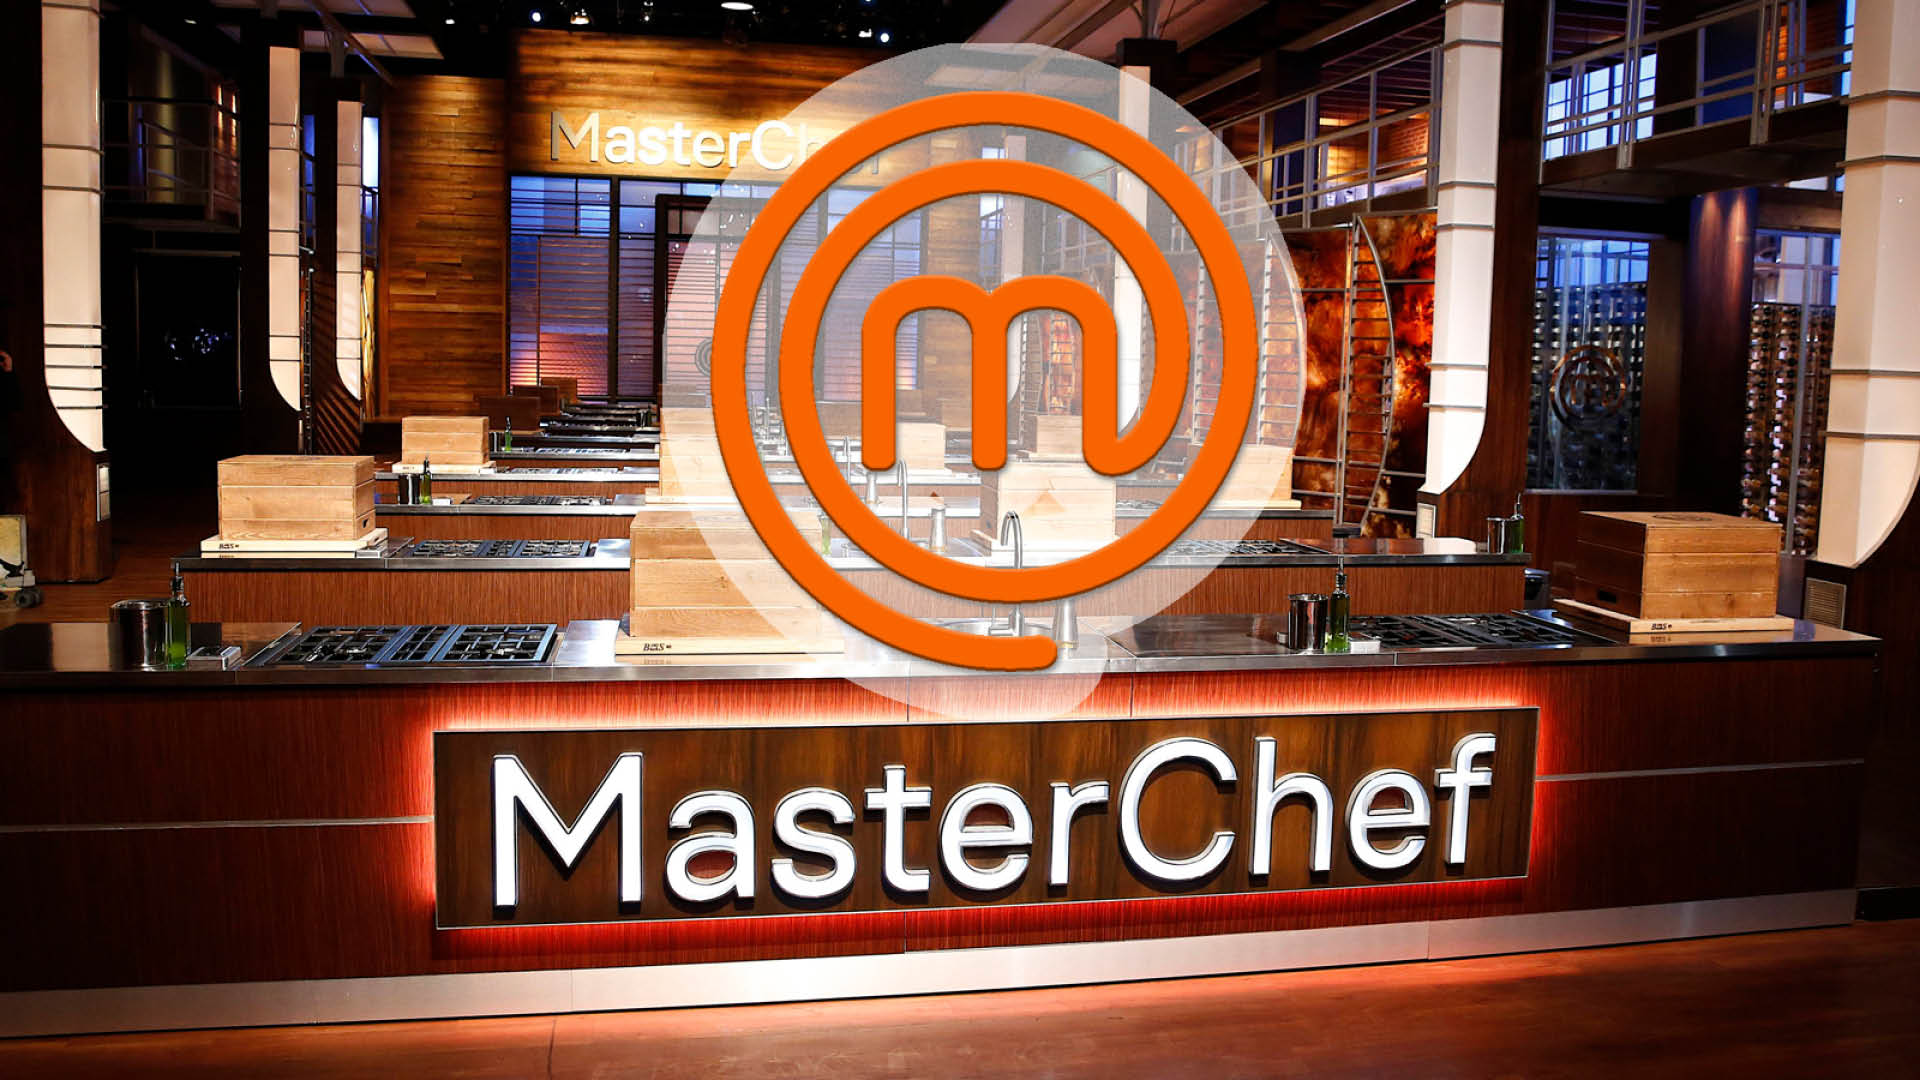 MSC Cruises ‘MasterChef’ Experience Partnership Extended License Global